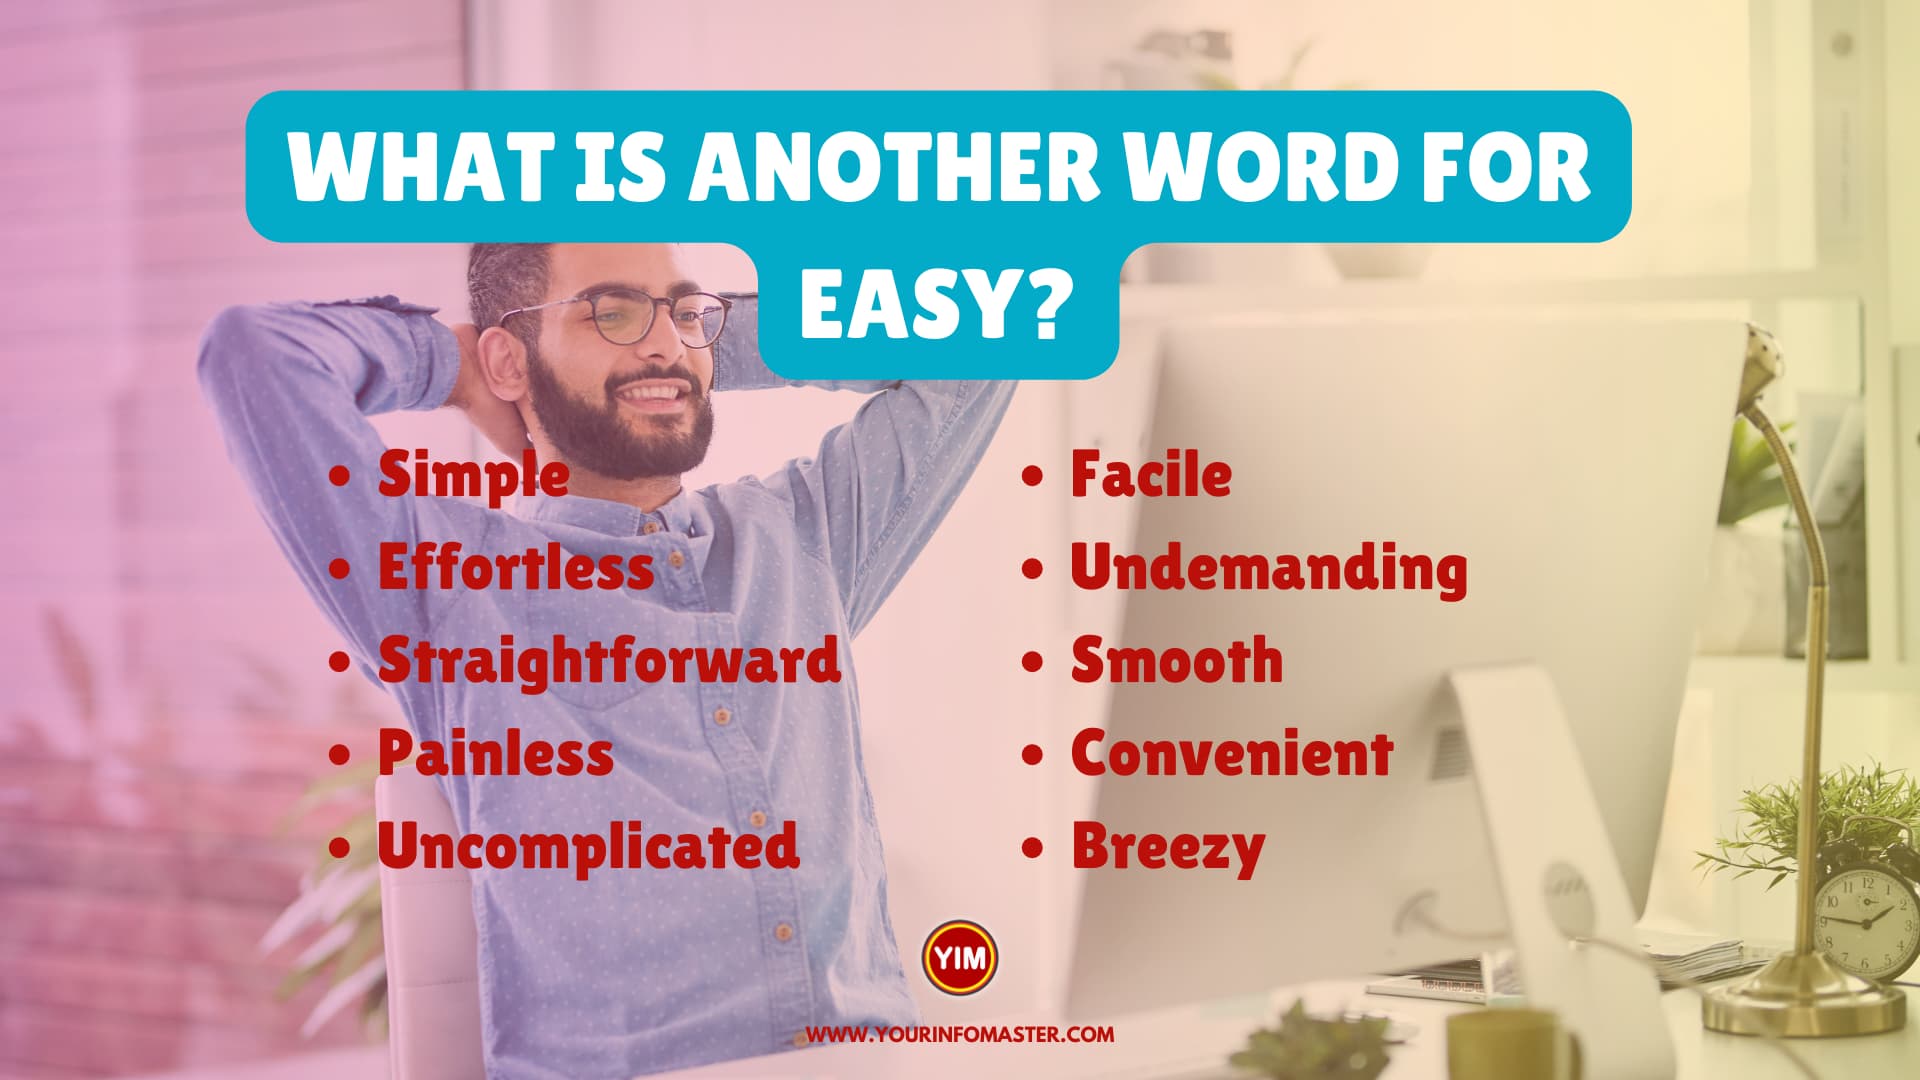 What is another word for Easy